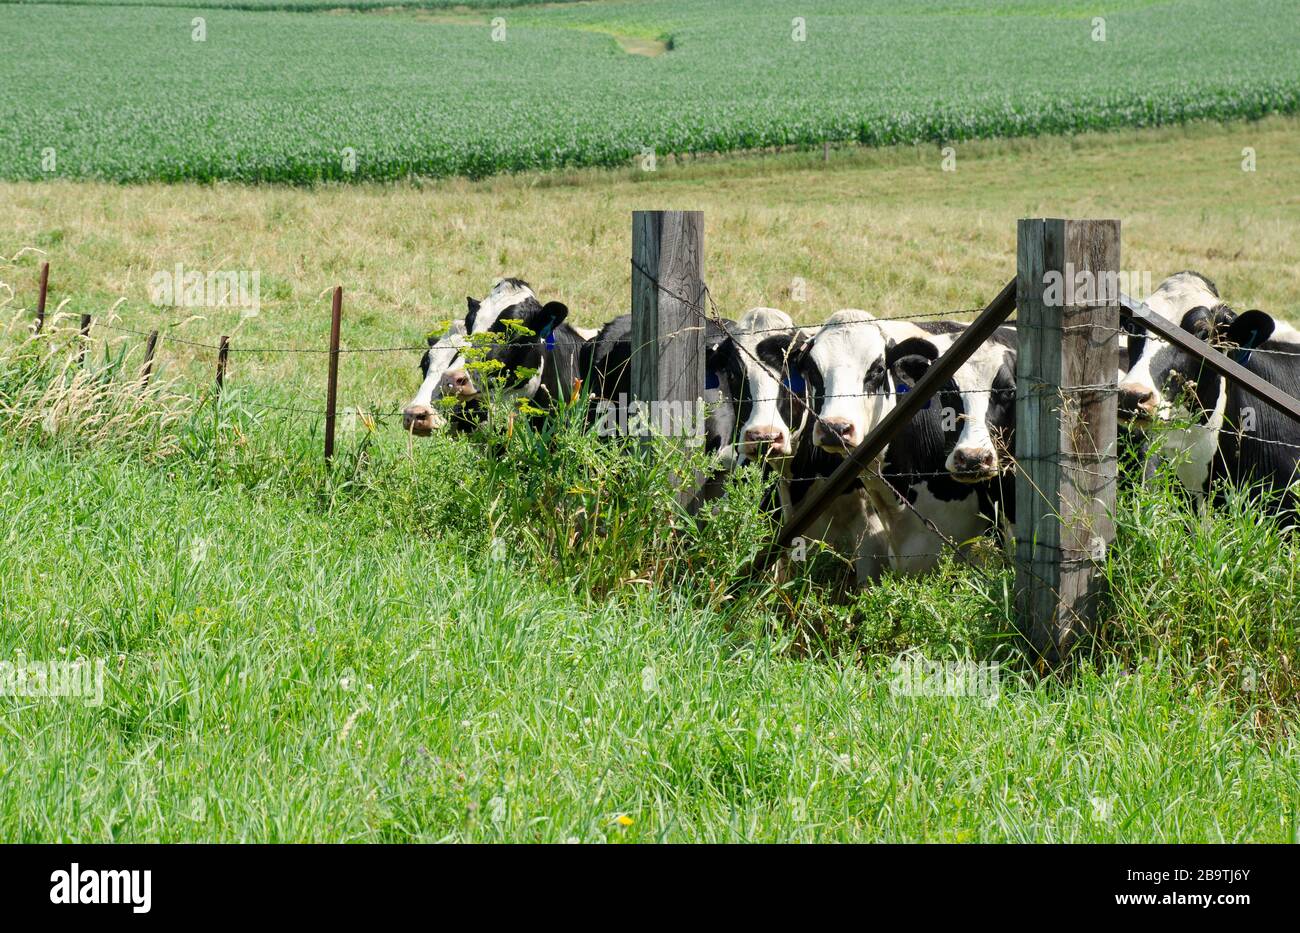 A herd of cows standing in a field together Stock Photo